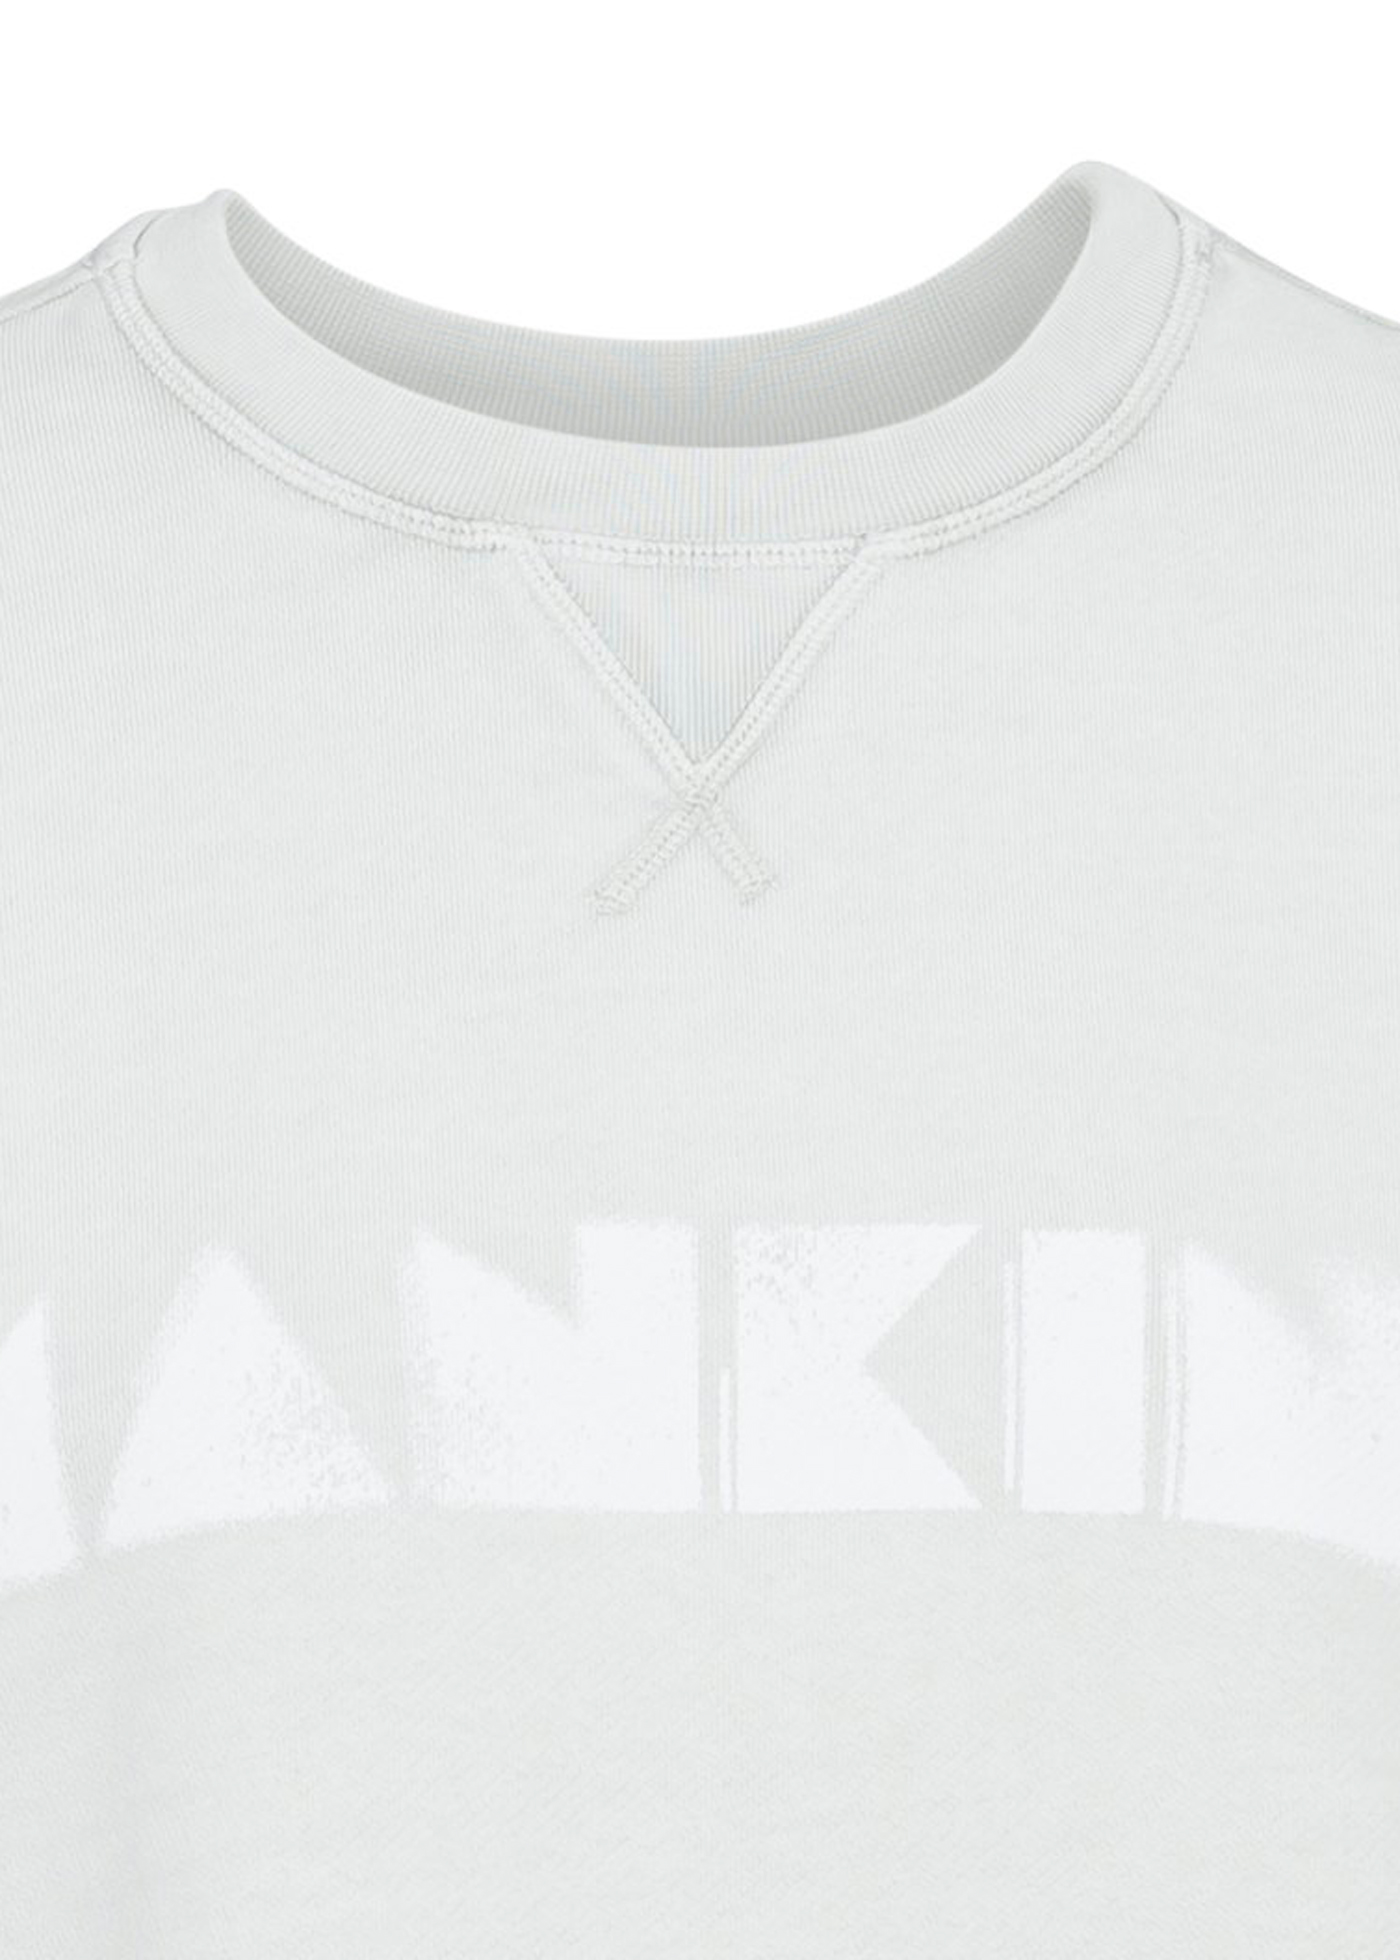 MANKIND SWEAT COTTON WITH PRINTED LOGO PALE BLUE image number 2